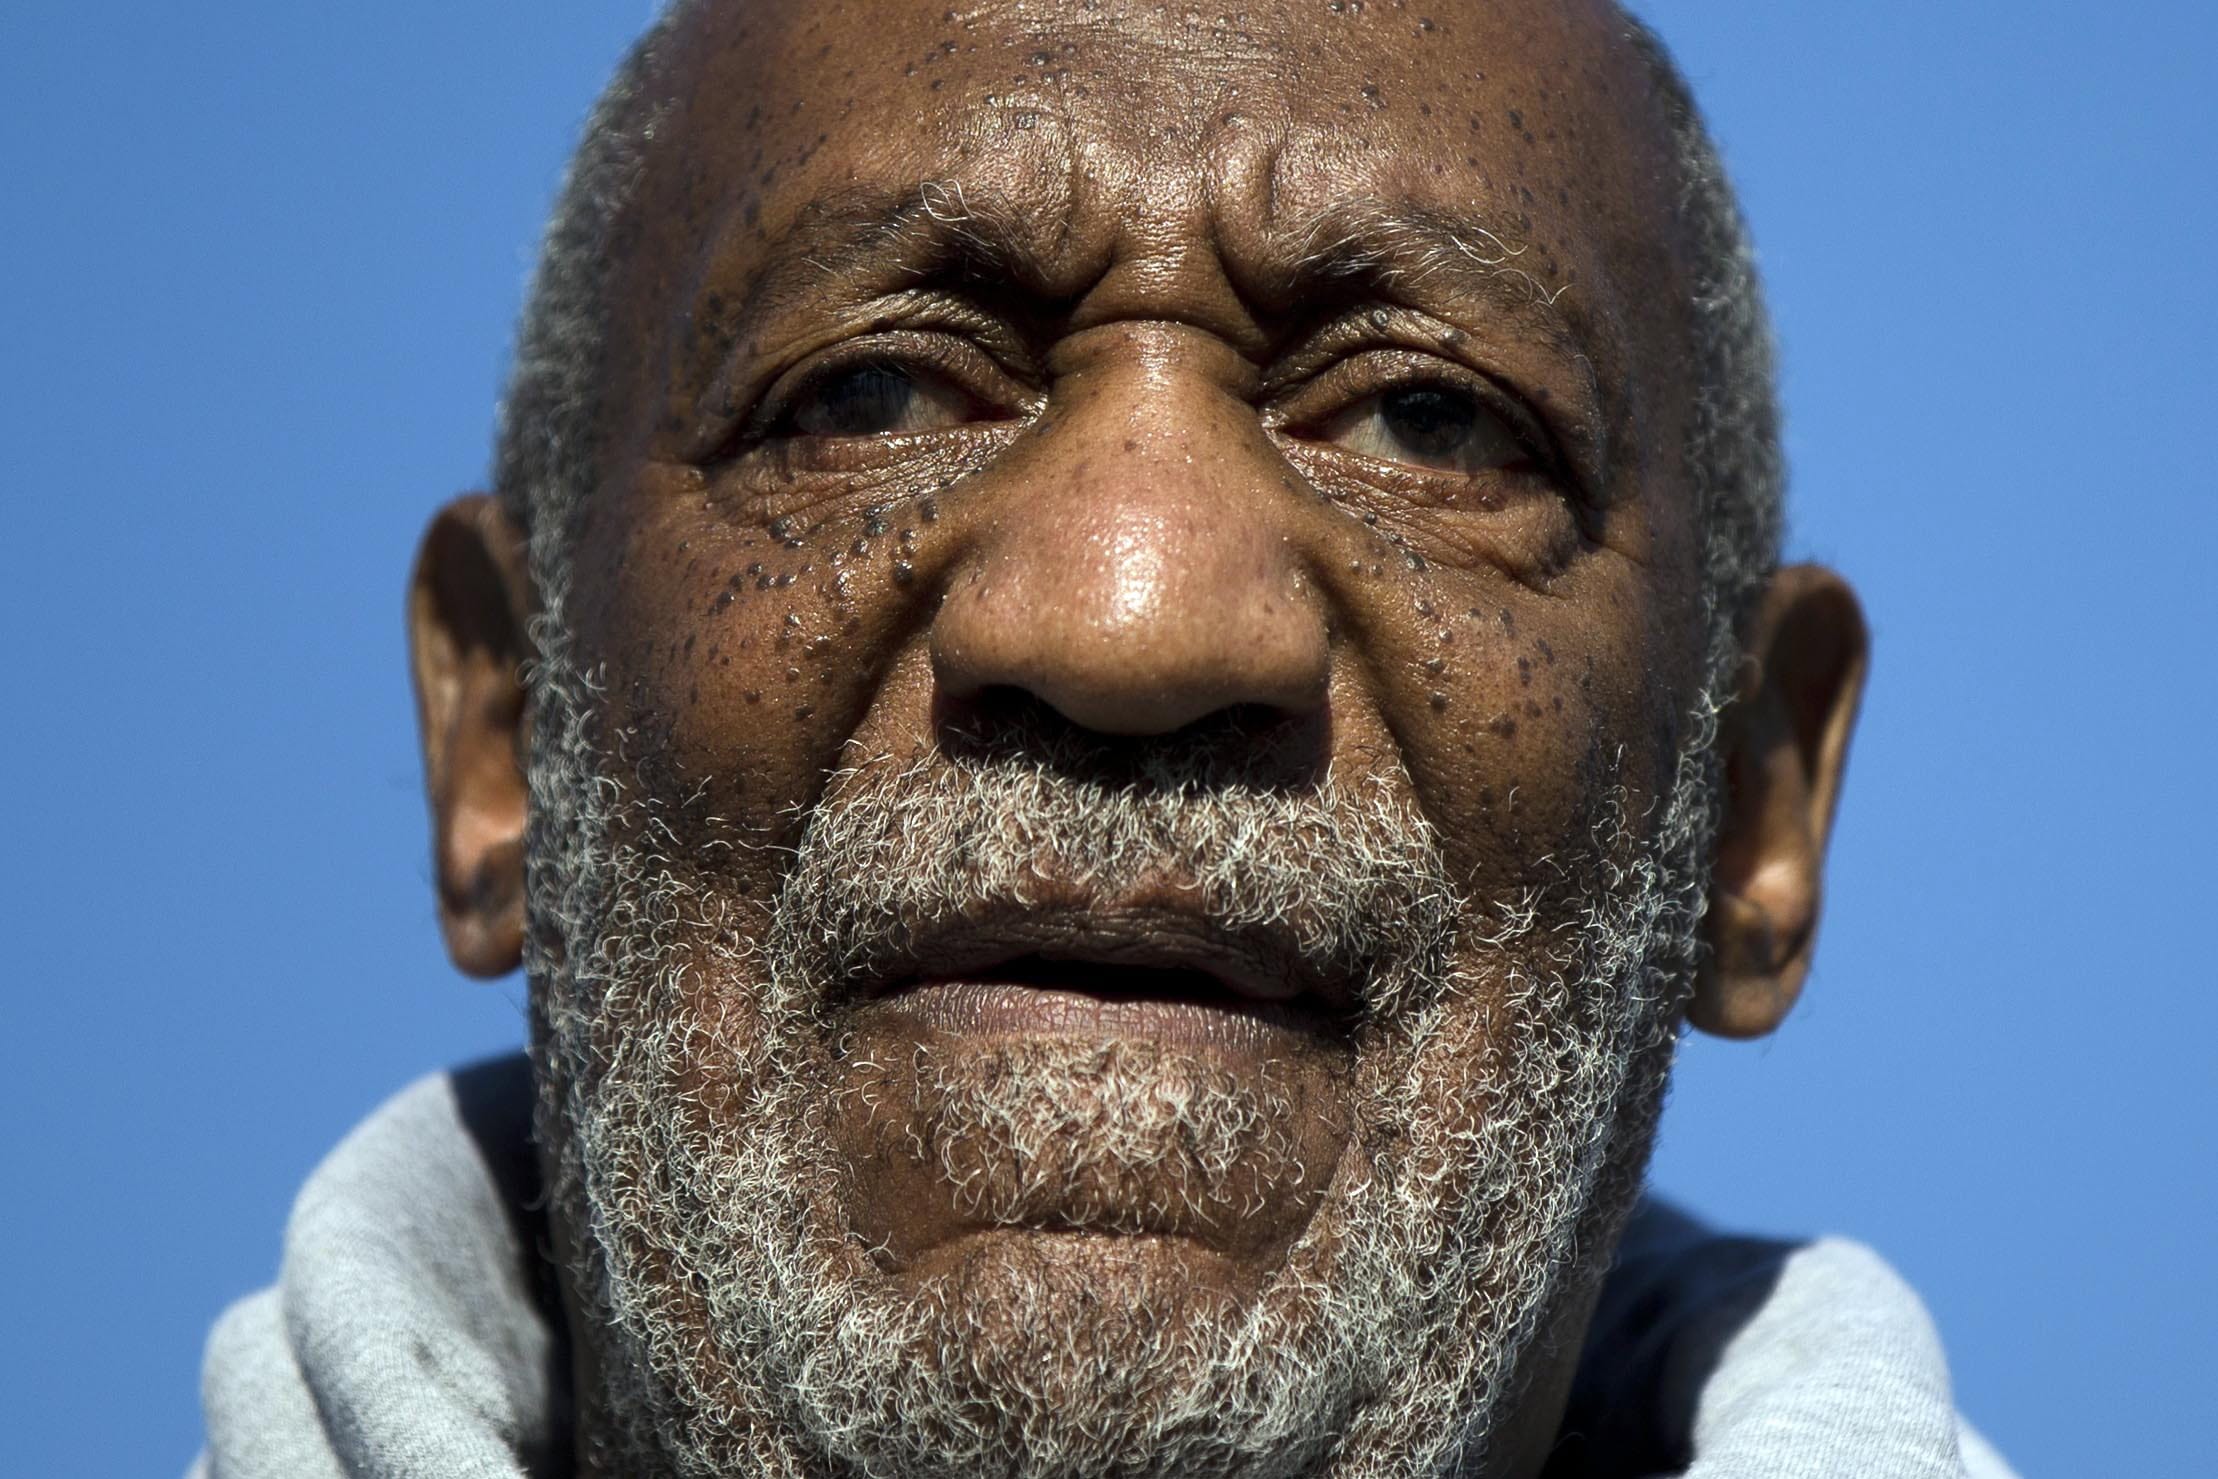 Entertainer and Navy veteran Bill Cosby speaks Nov. 11 during a Veterans Day ceremony at the The All Wars Memorial to Colored Soldiers and Sailors in Philadelphia. Many are questioning why the women accusing Cosby of sexual assault have waited so long to air their claims.